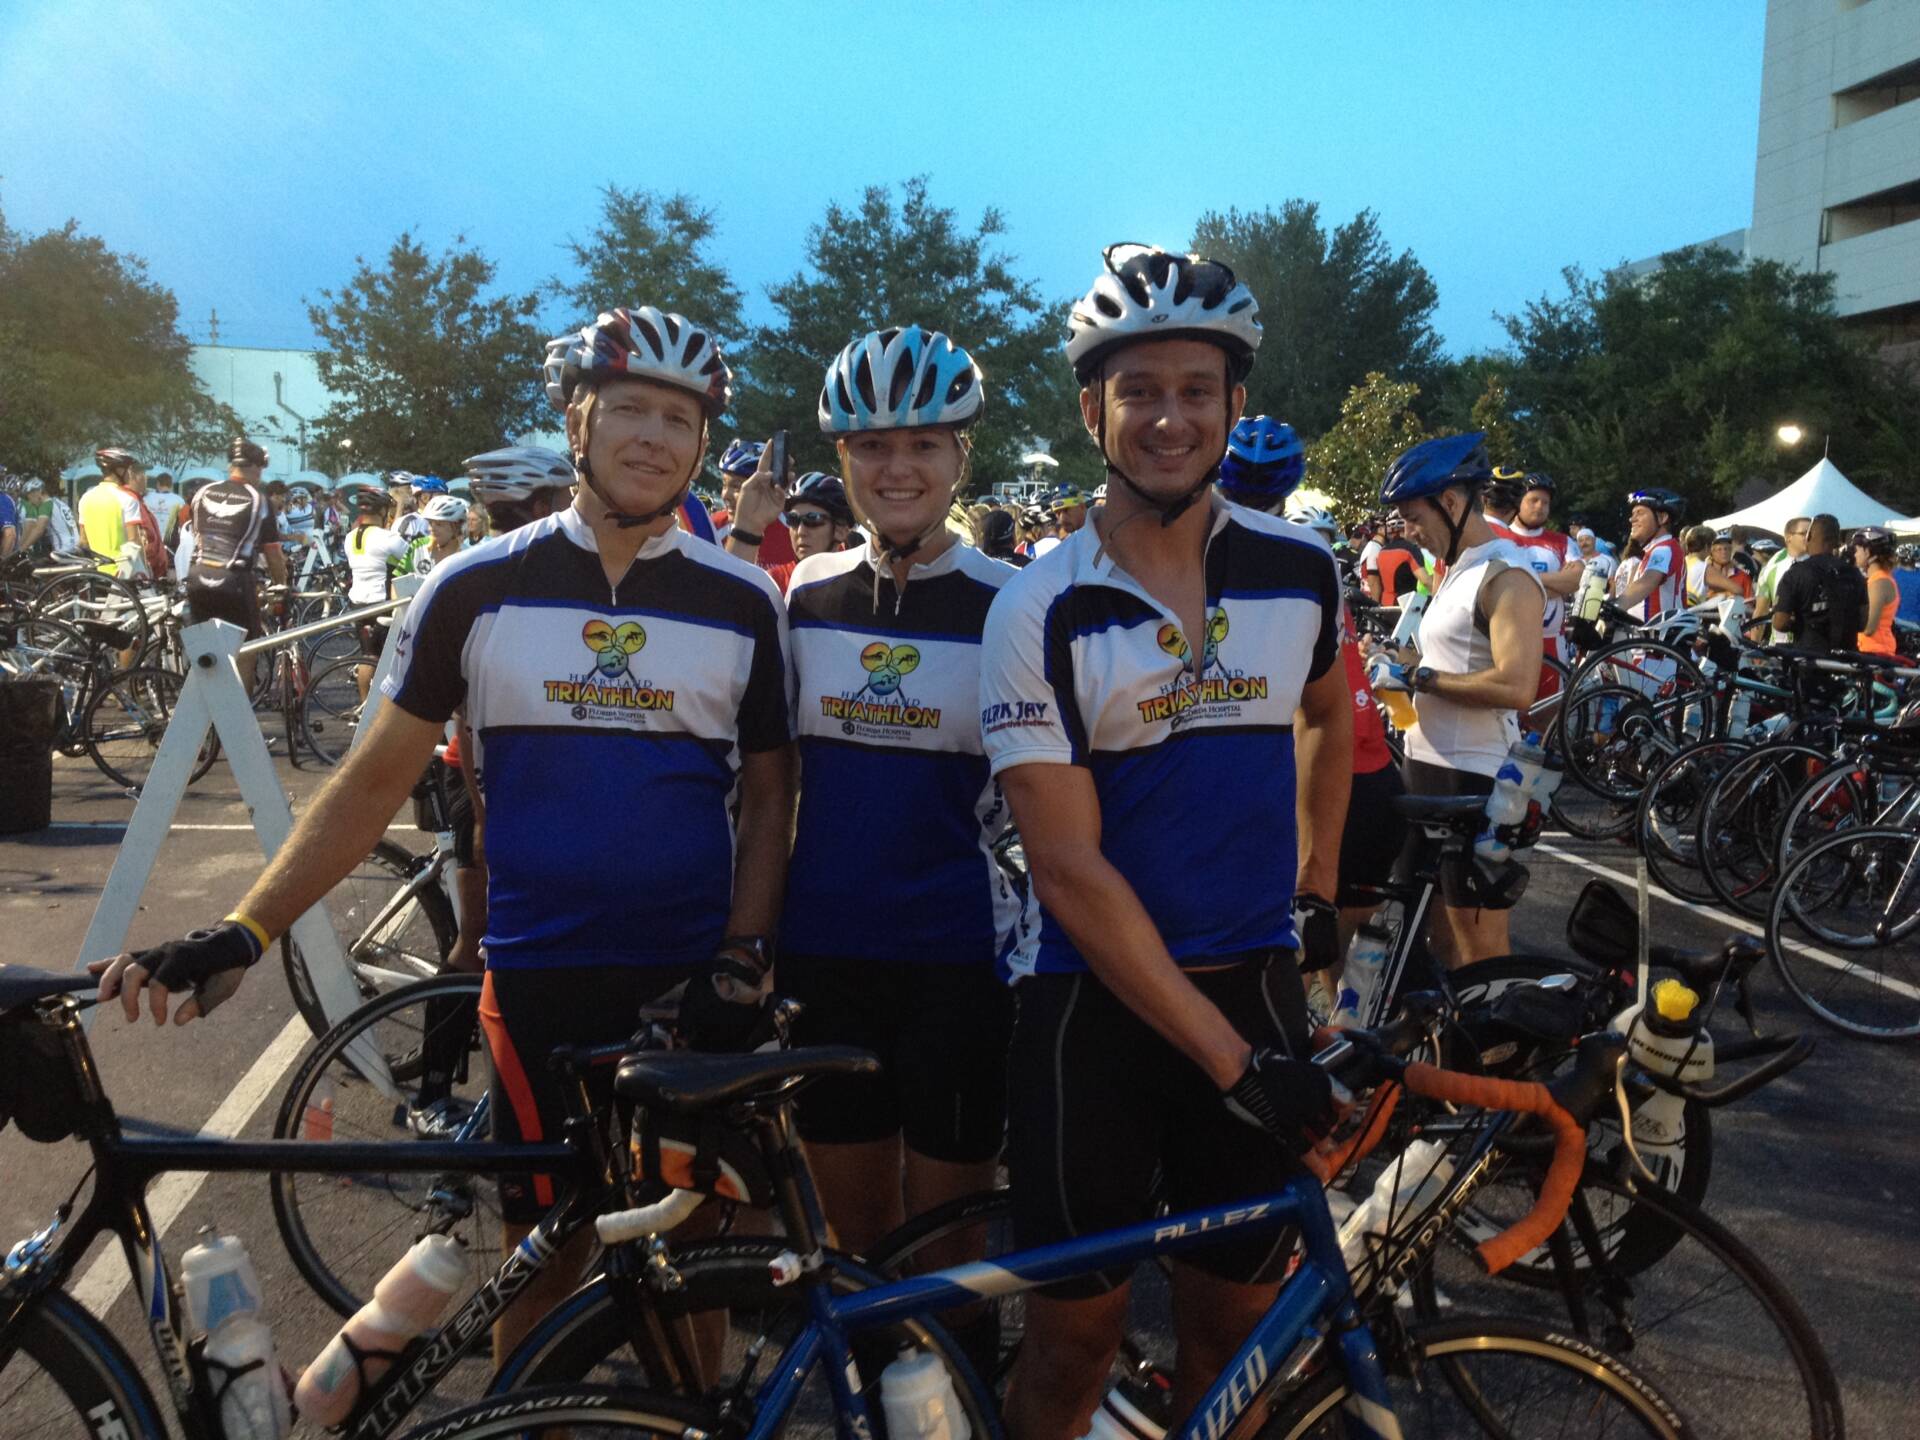 Tom (on the left), his daughter, and son-in-law before starting a century (100 mile) ride